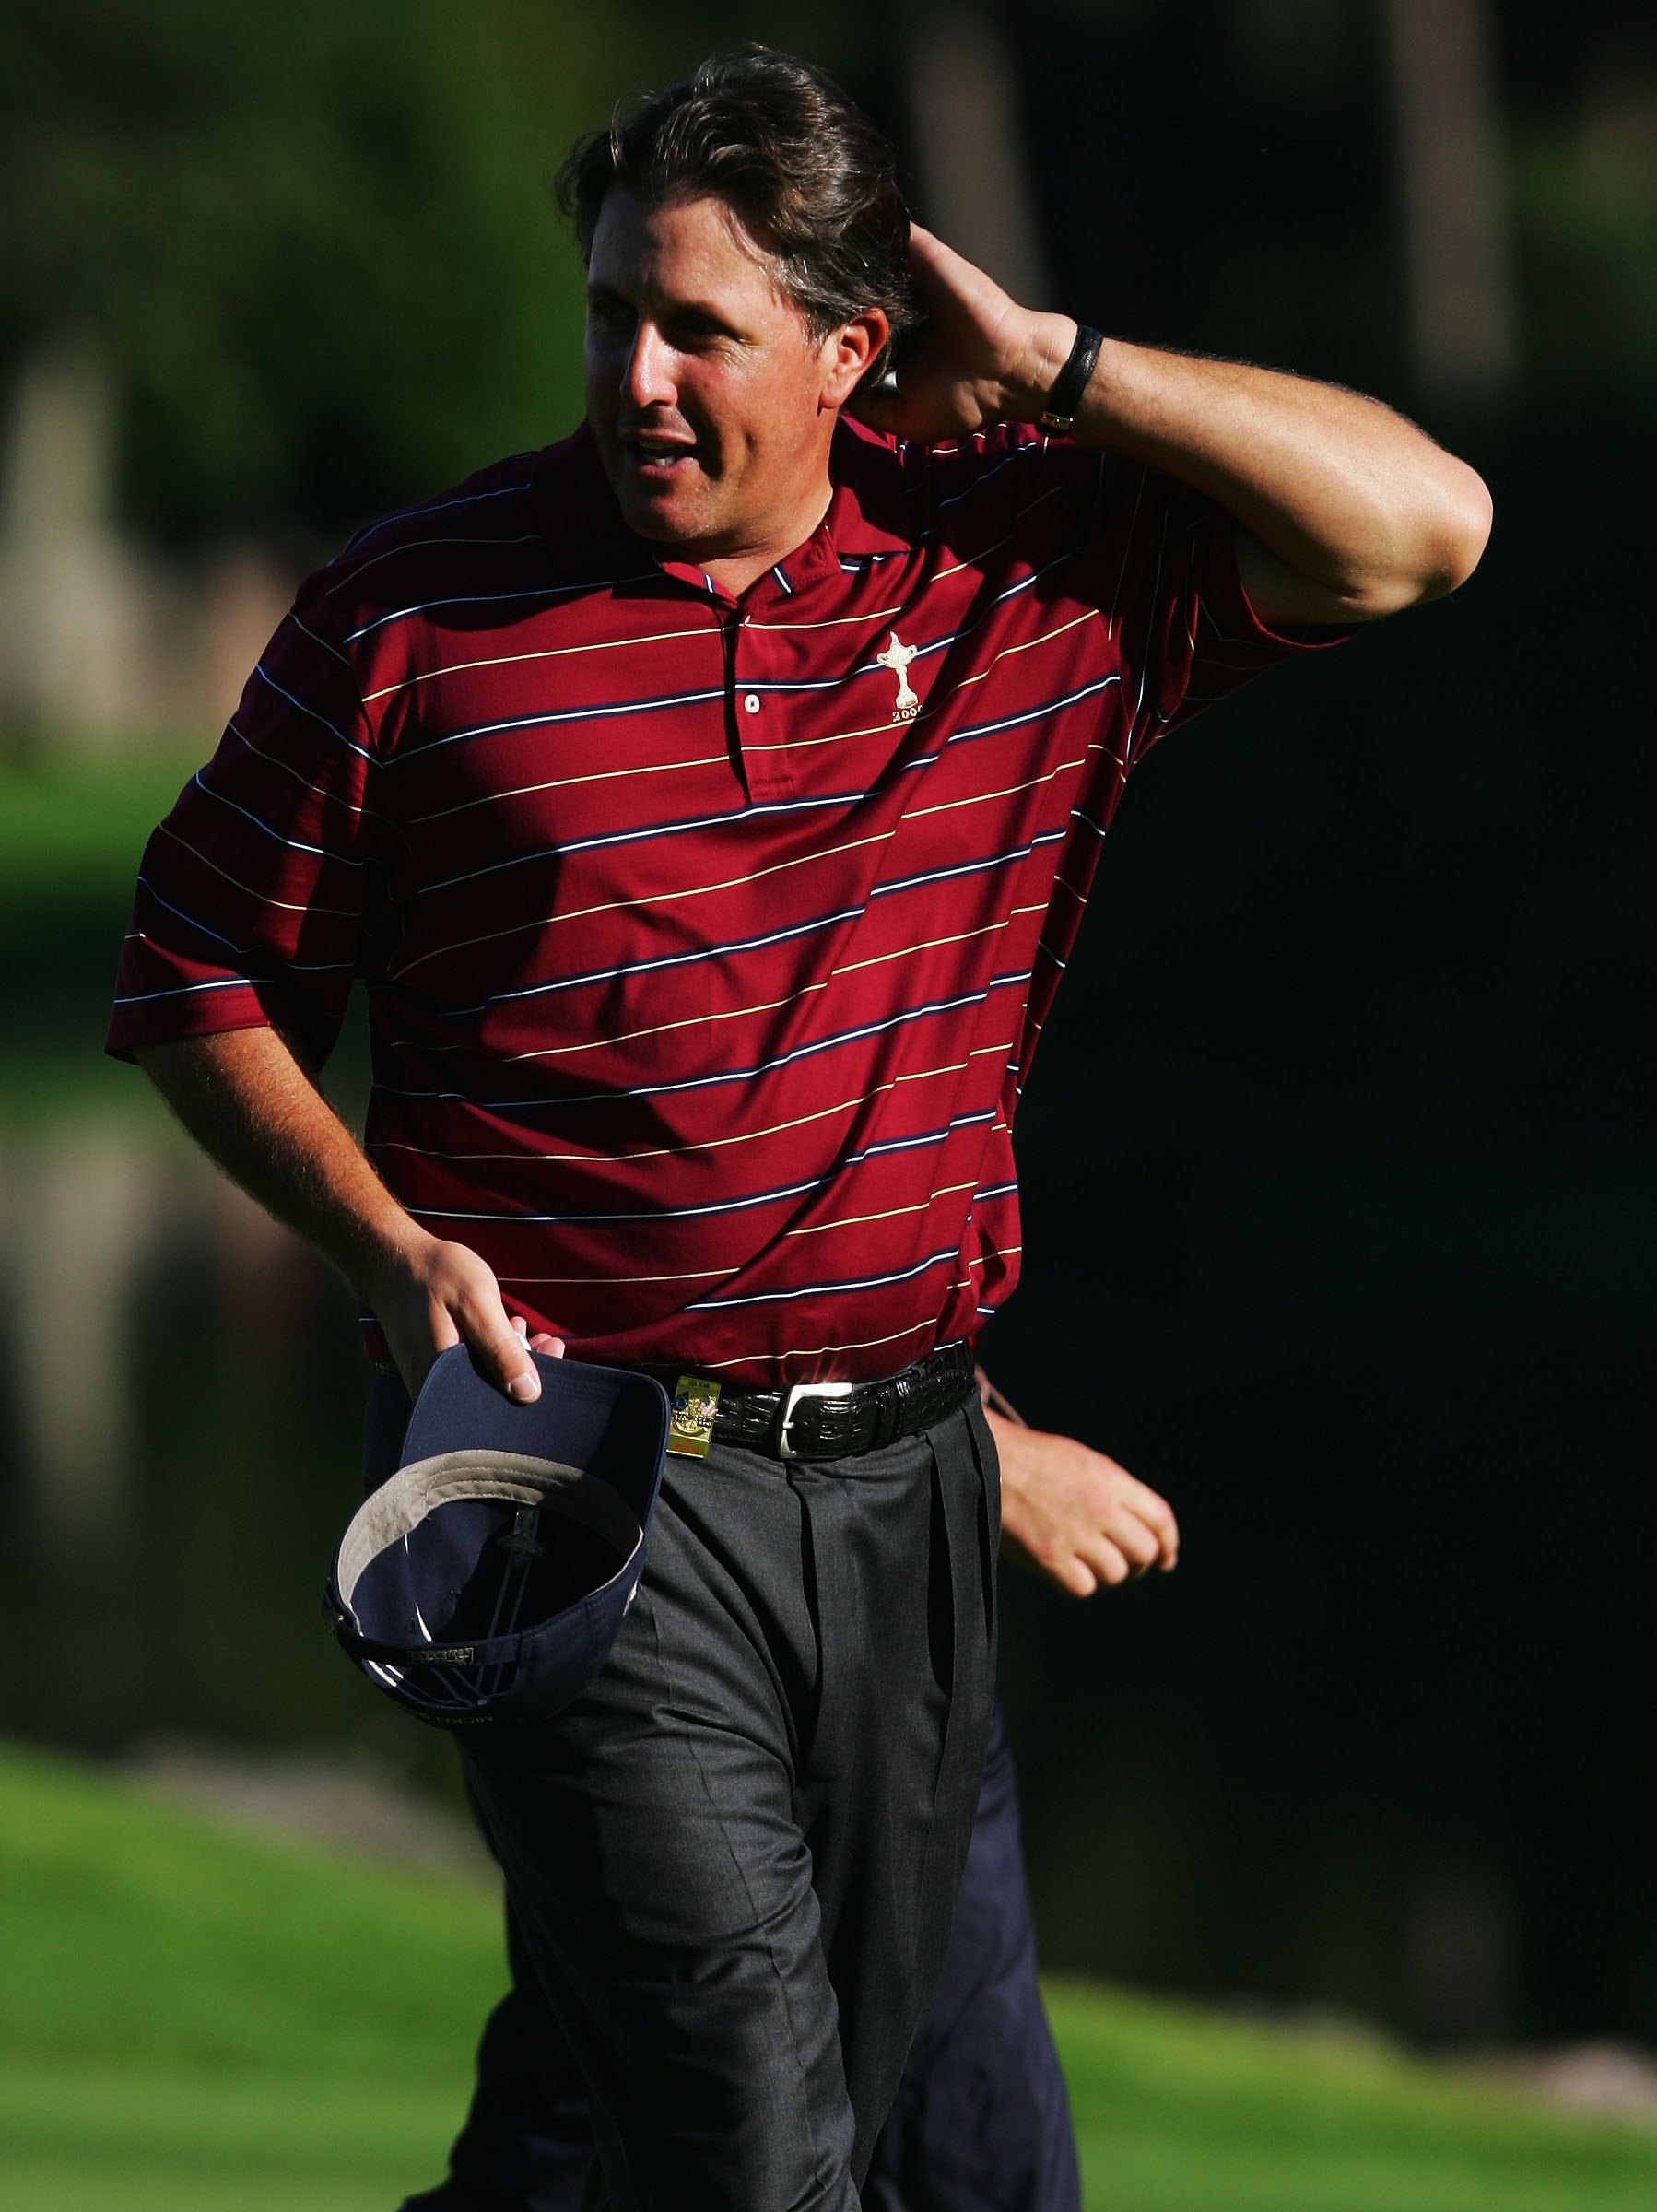 KILDARE, IRELAND - SEPTEMBER 24:  Phil Mickelson of USA acknowledges the crowd on the 17th green after losing his singles match on the final day of the 2006 Ryder Cup at The K Club on September 24, 2006 in Straffan, Co. Kildare, Ireland.  (Photo by Ross K